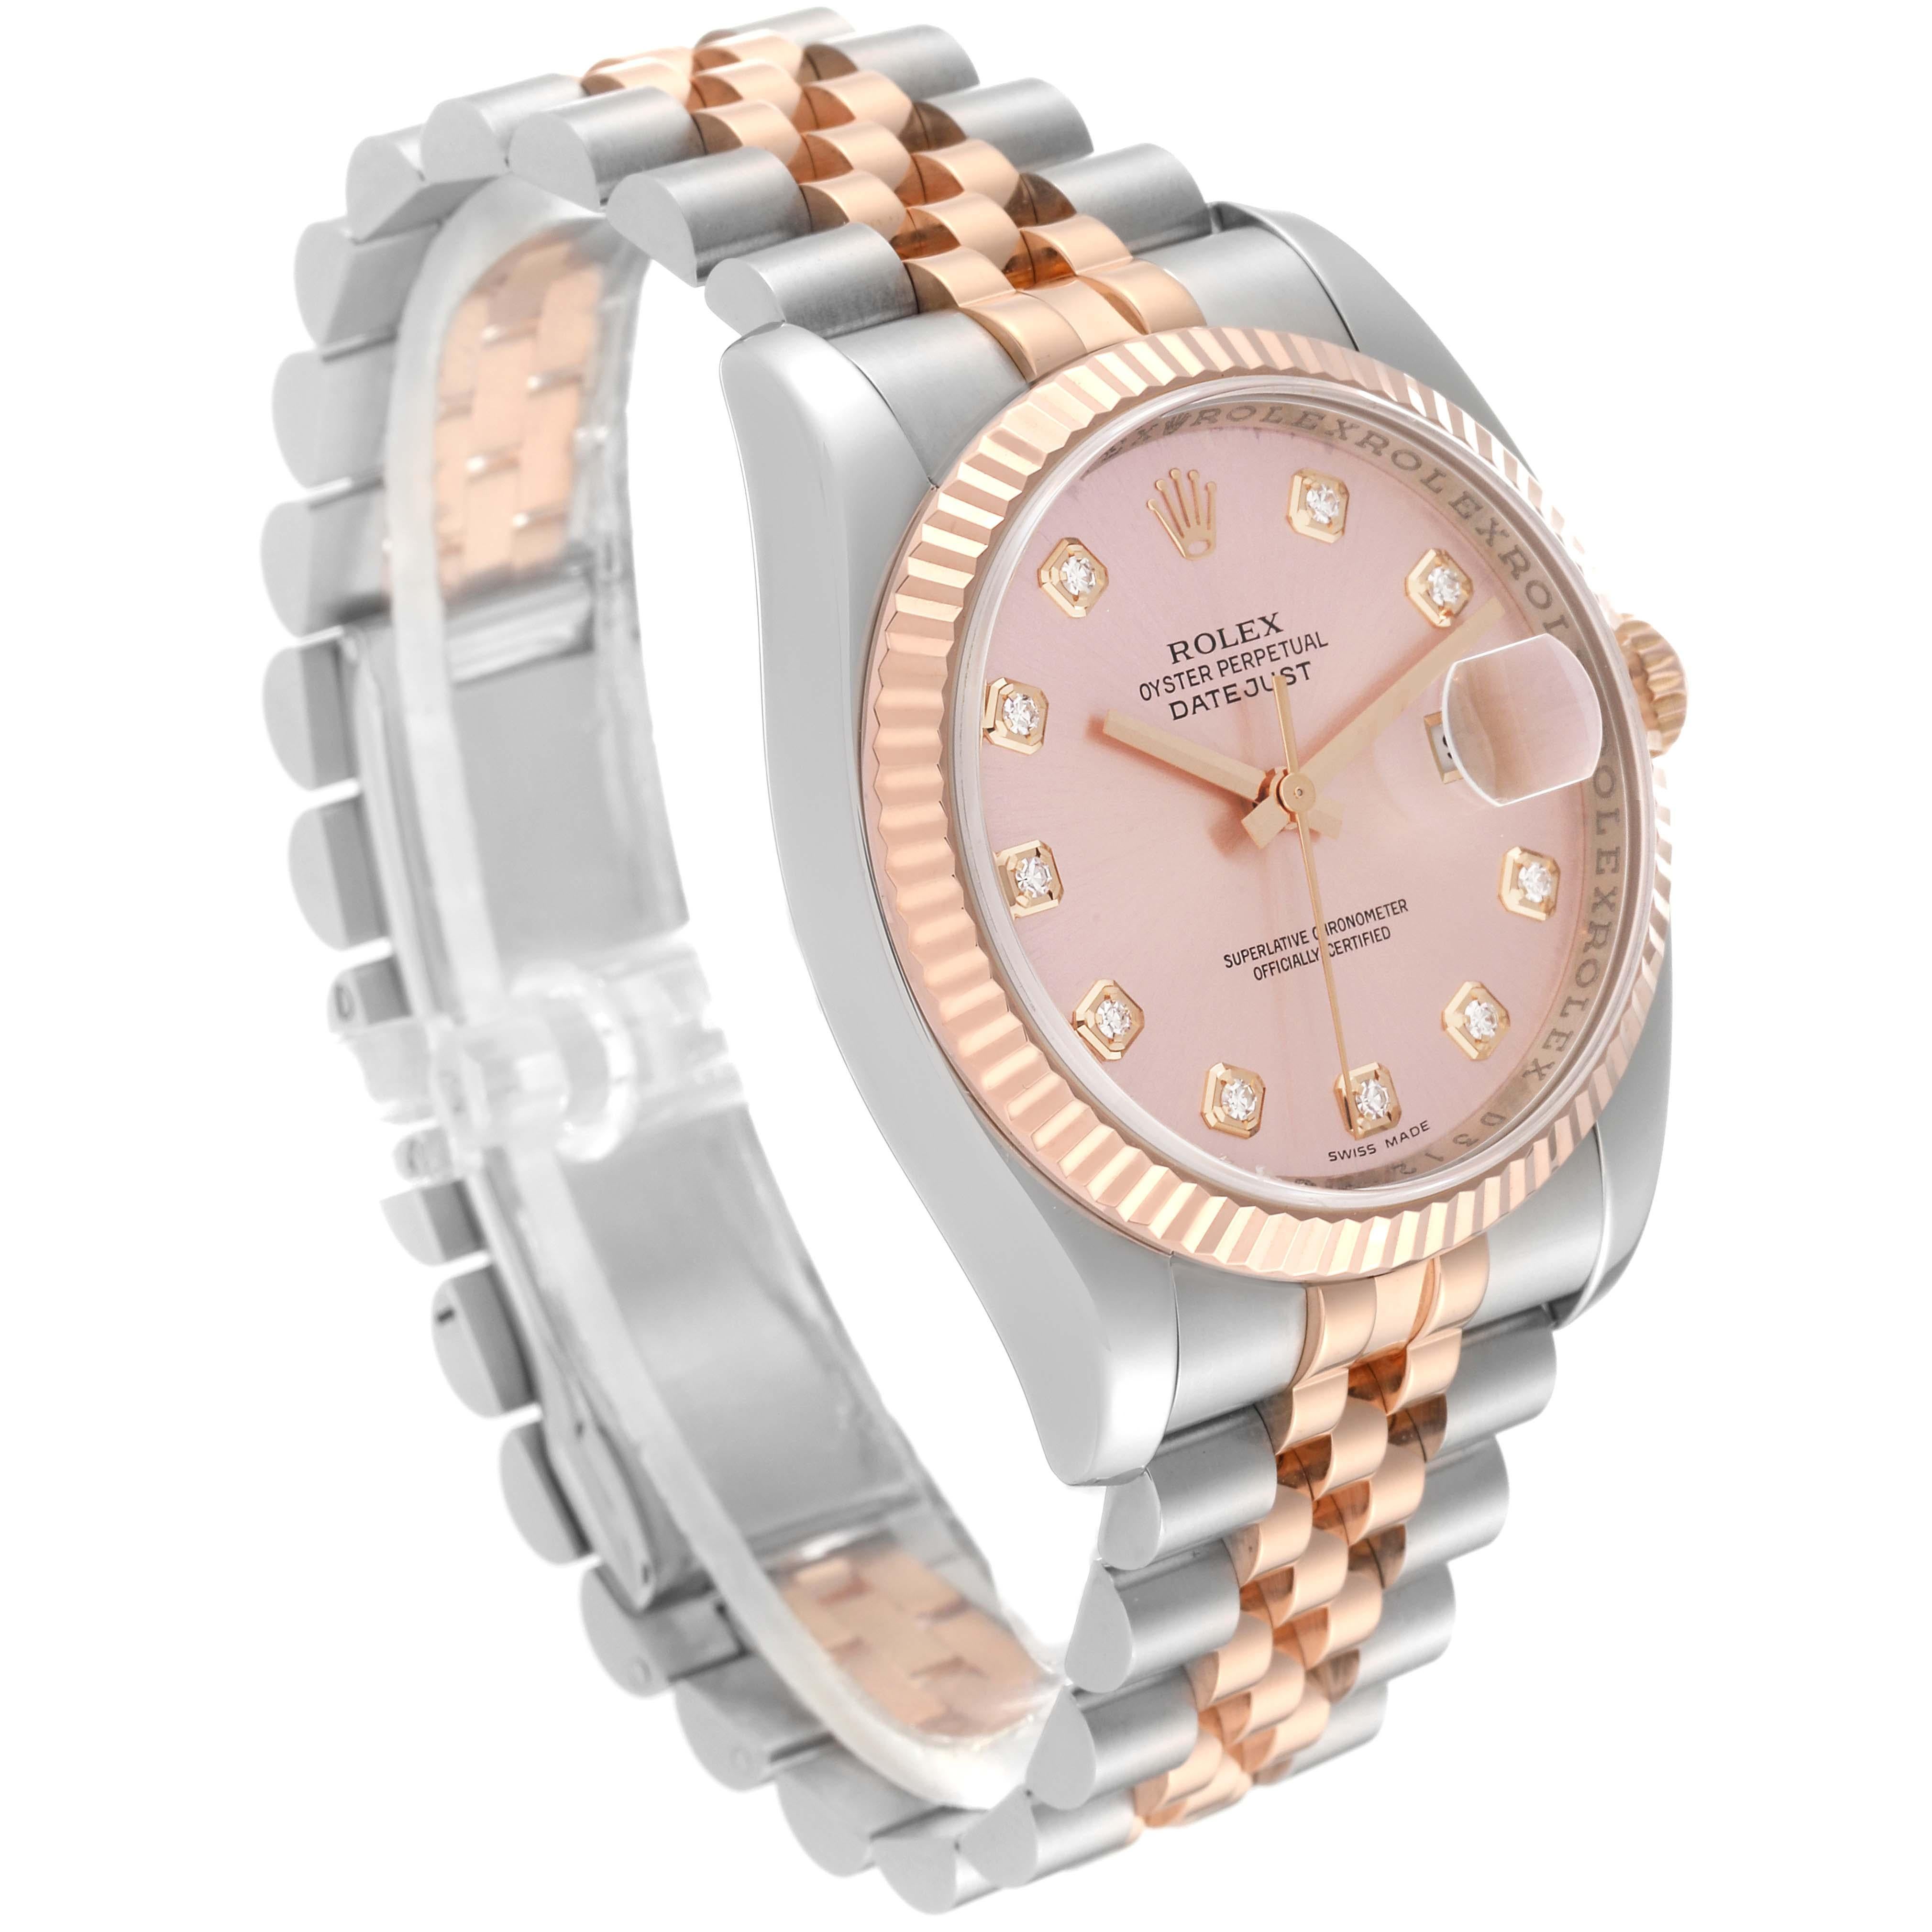 Rolex Datejust Steel Rose Gold Pink Diamond Dial Mens Watch 116231 For Sale 4